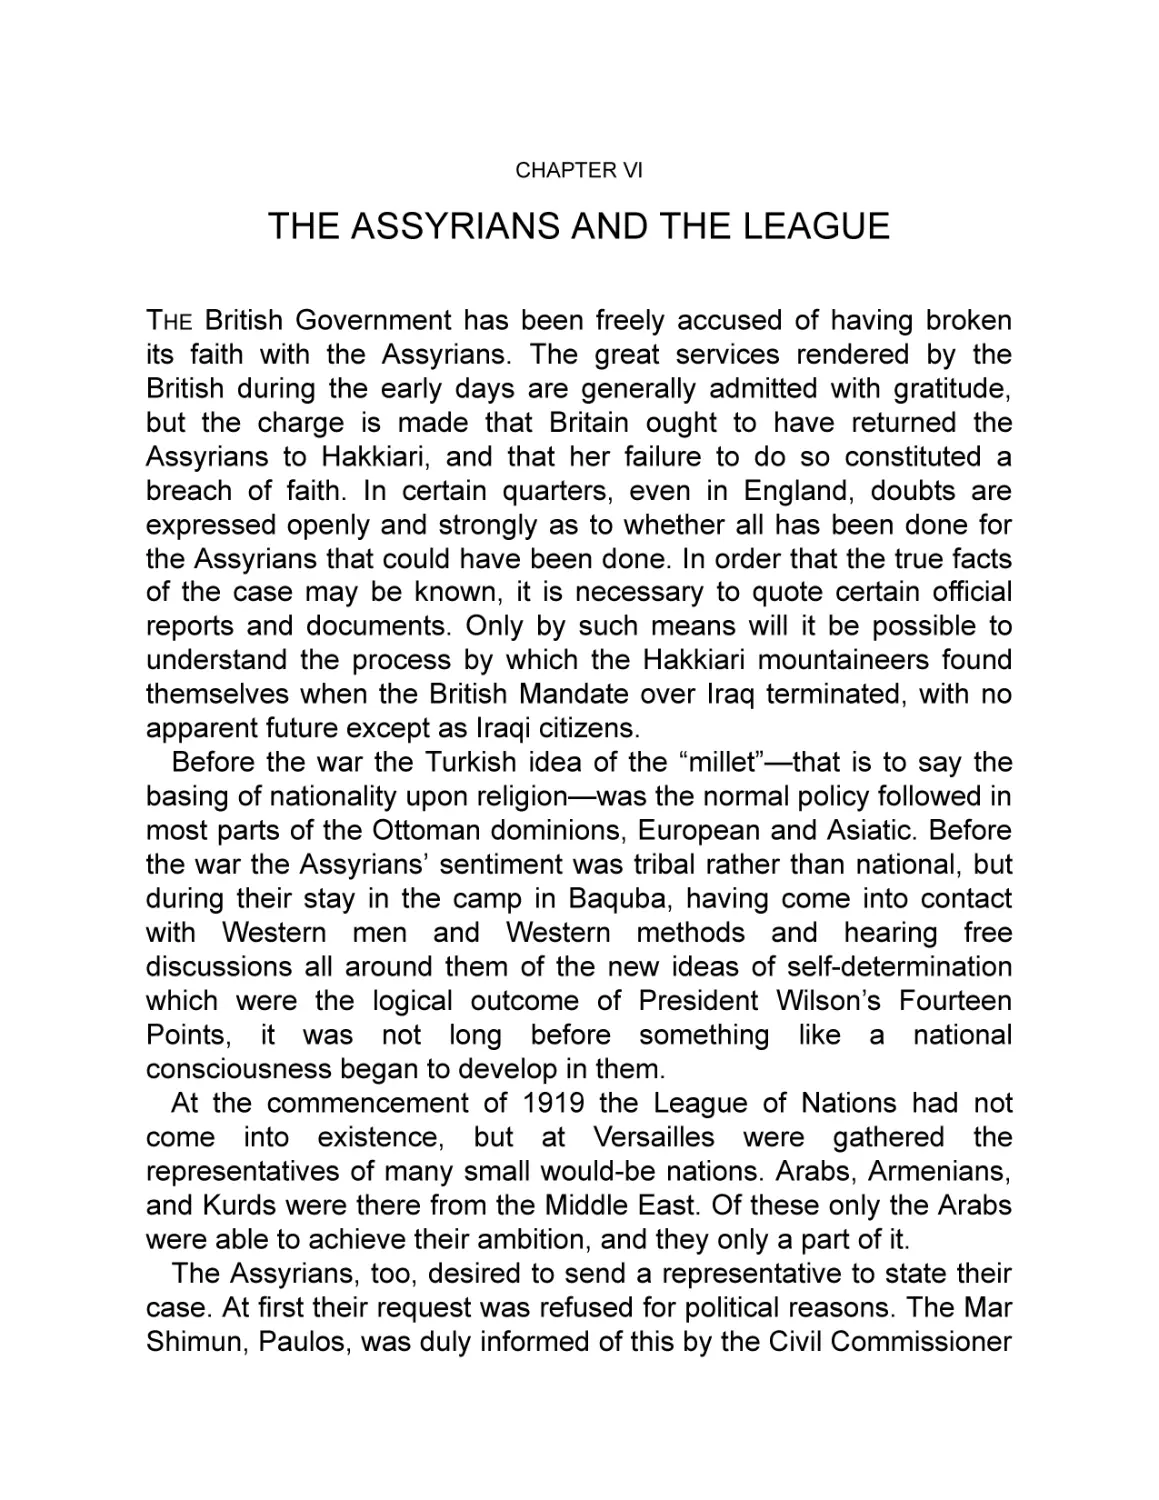 VI The Assyrians and the League